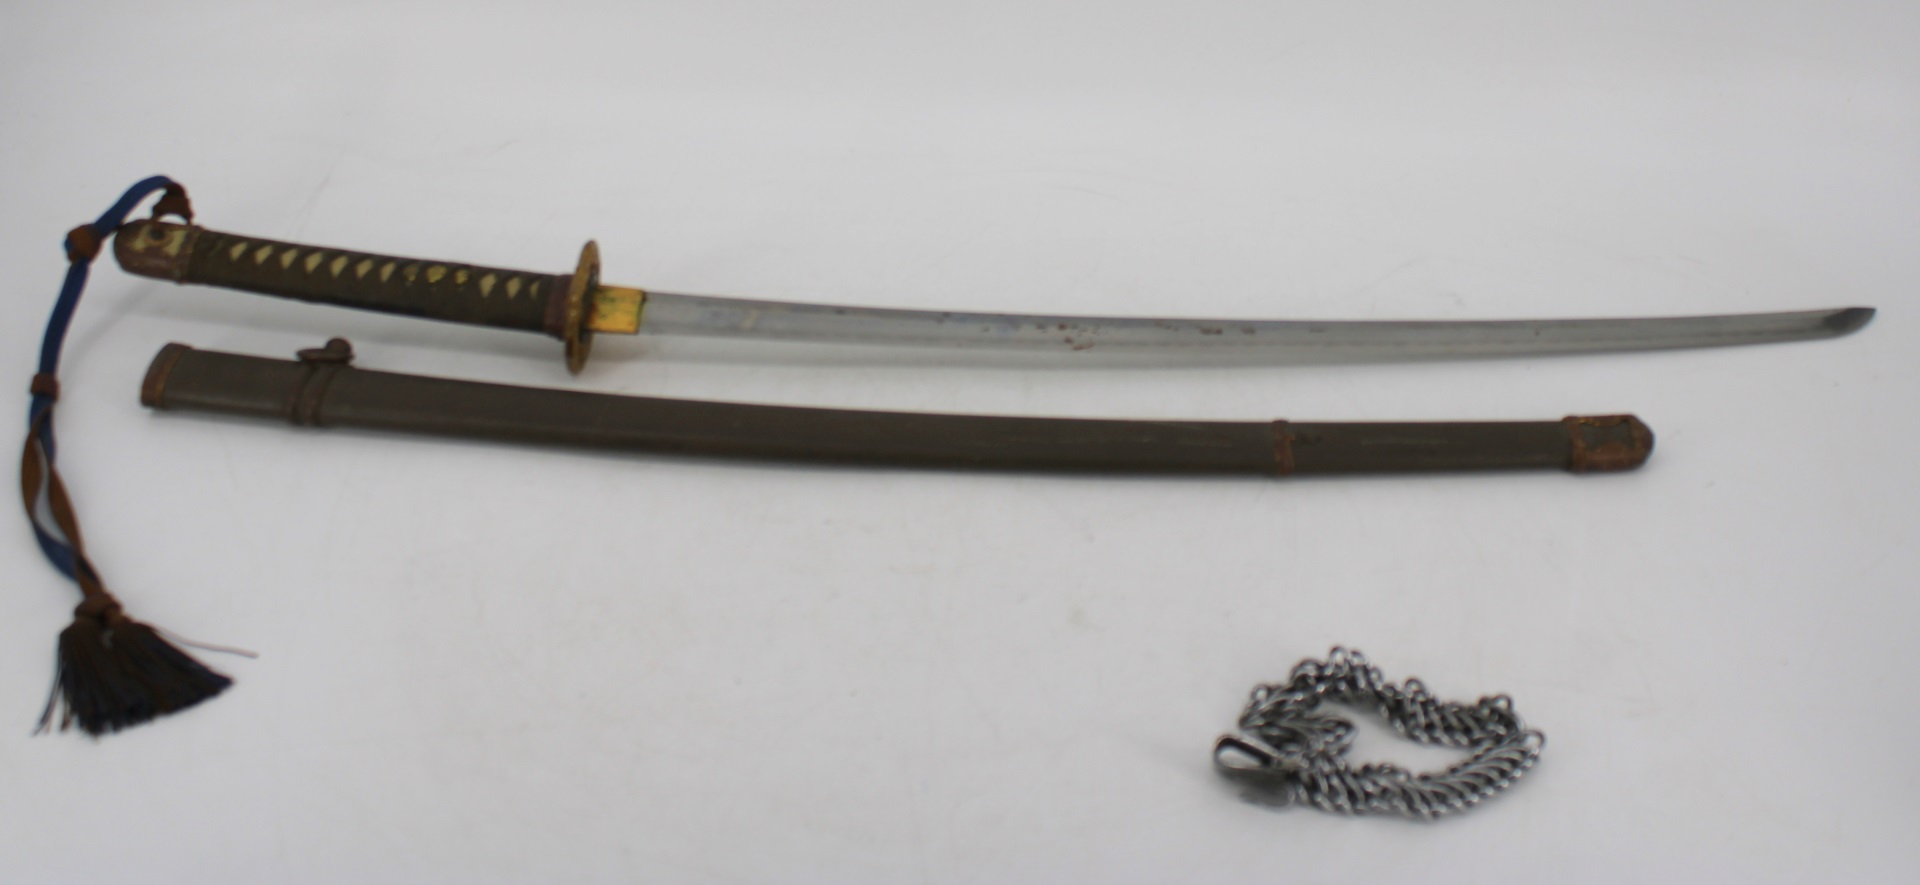 JAPANESE WW2 SWORD WITH CHAIN HANGER 3bc679